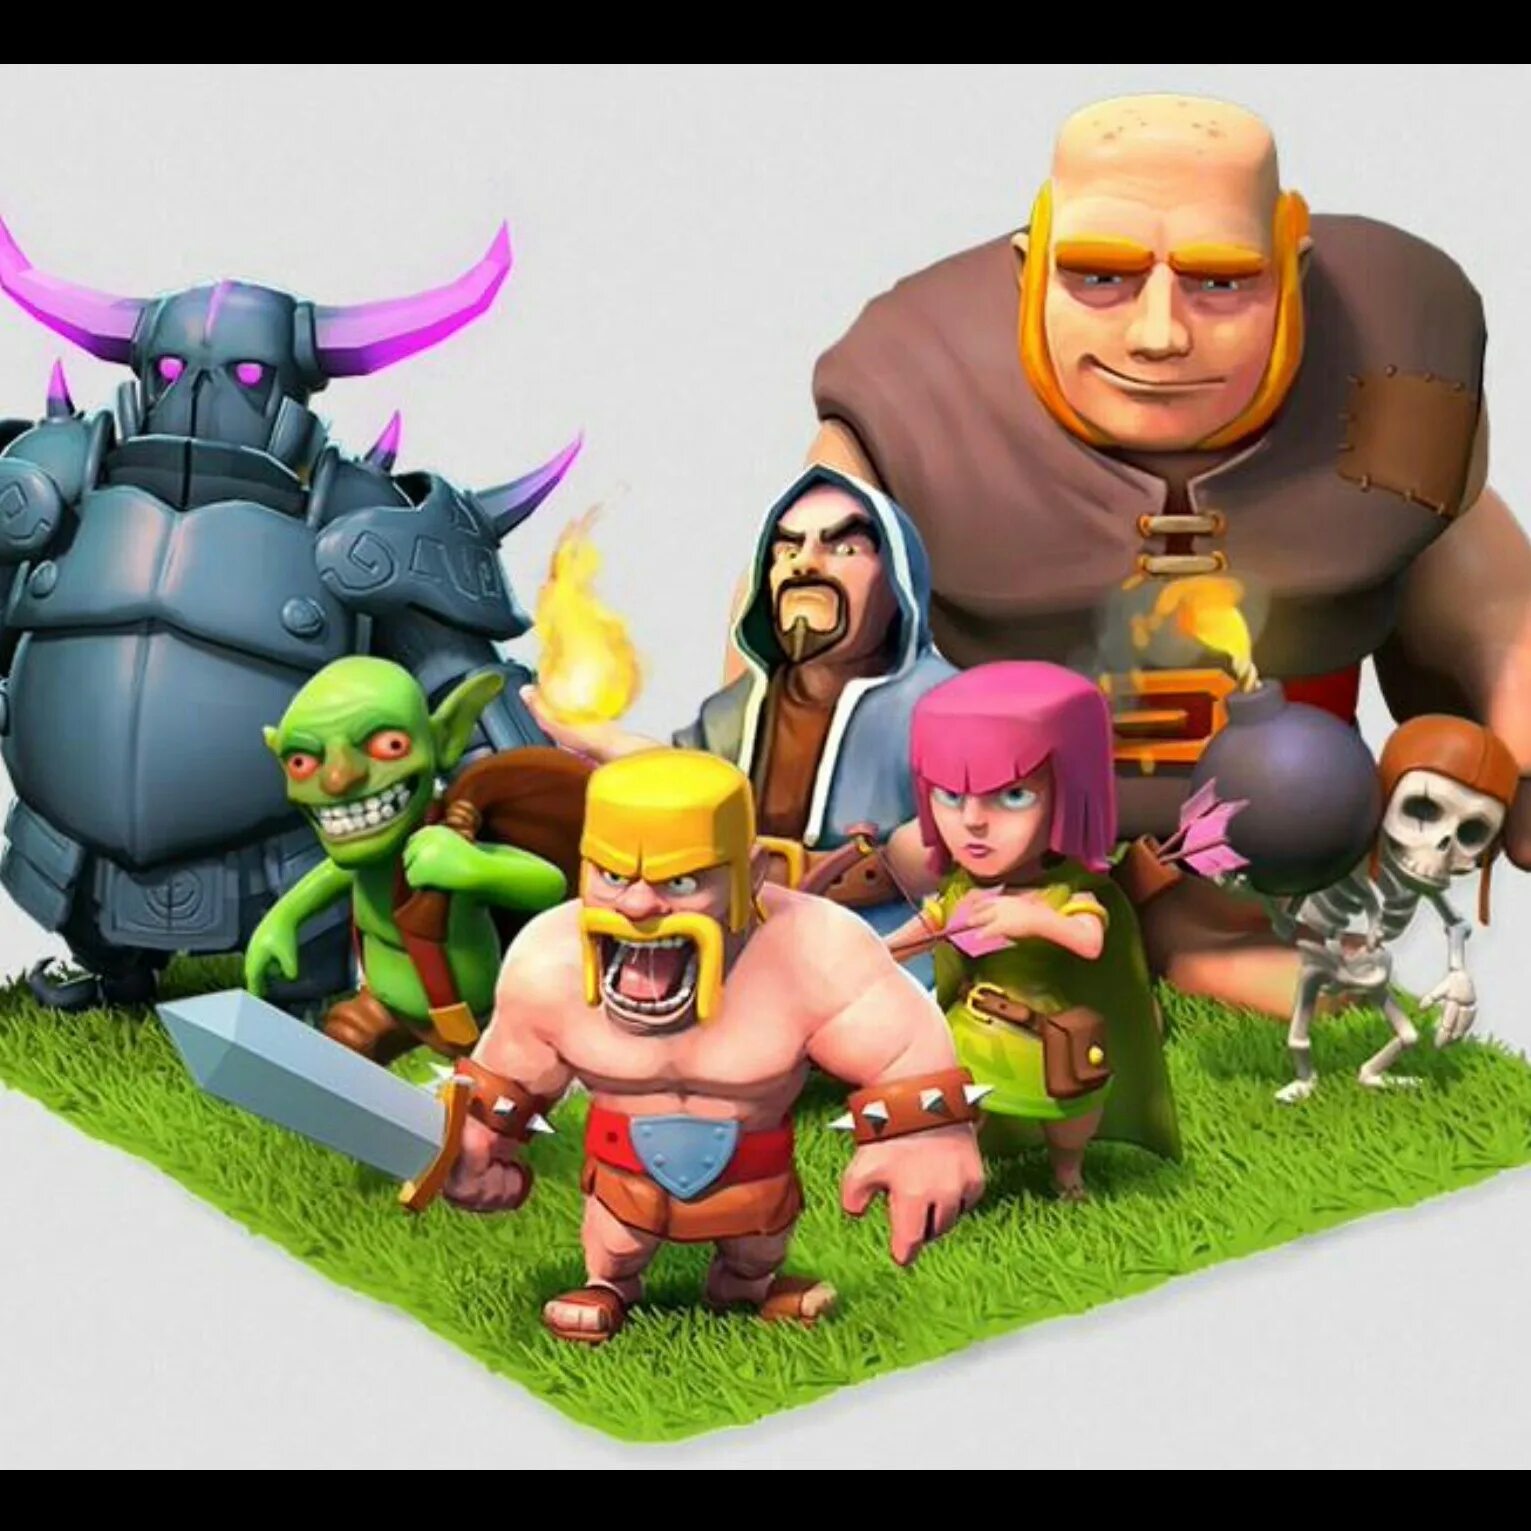 Supercell's clash of clans. Клэш оф кланс. Герои из игры Clash of Clans. Клэш оф кланс 18. Клеш анд кленс.